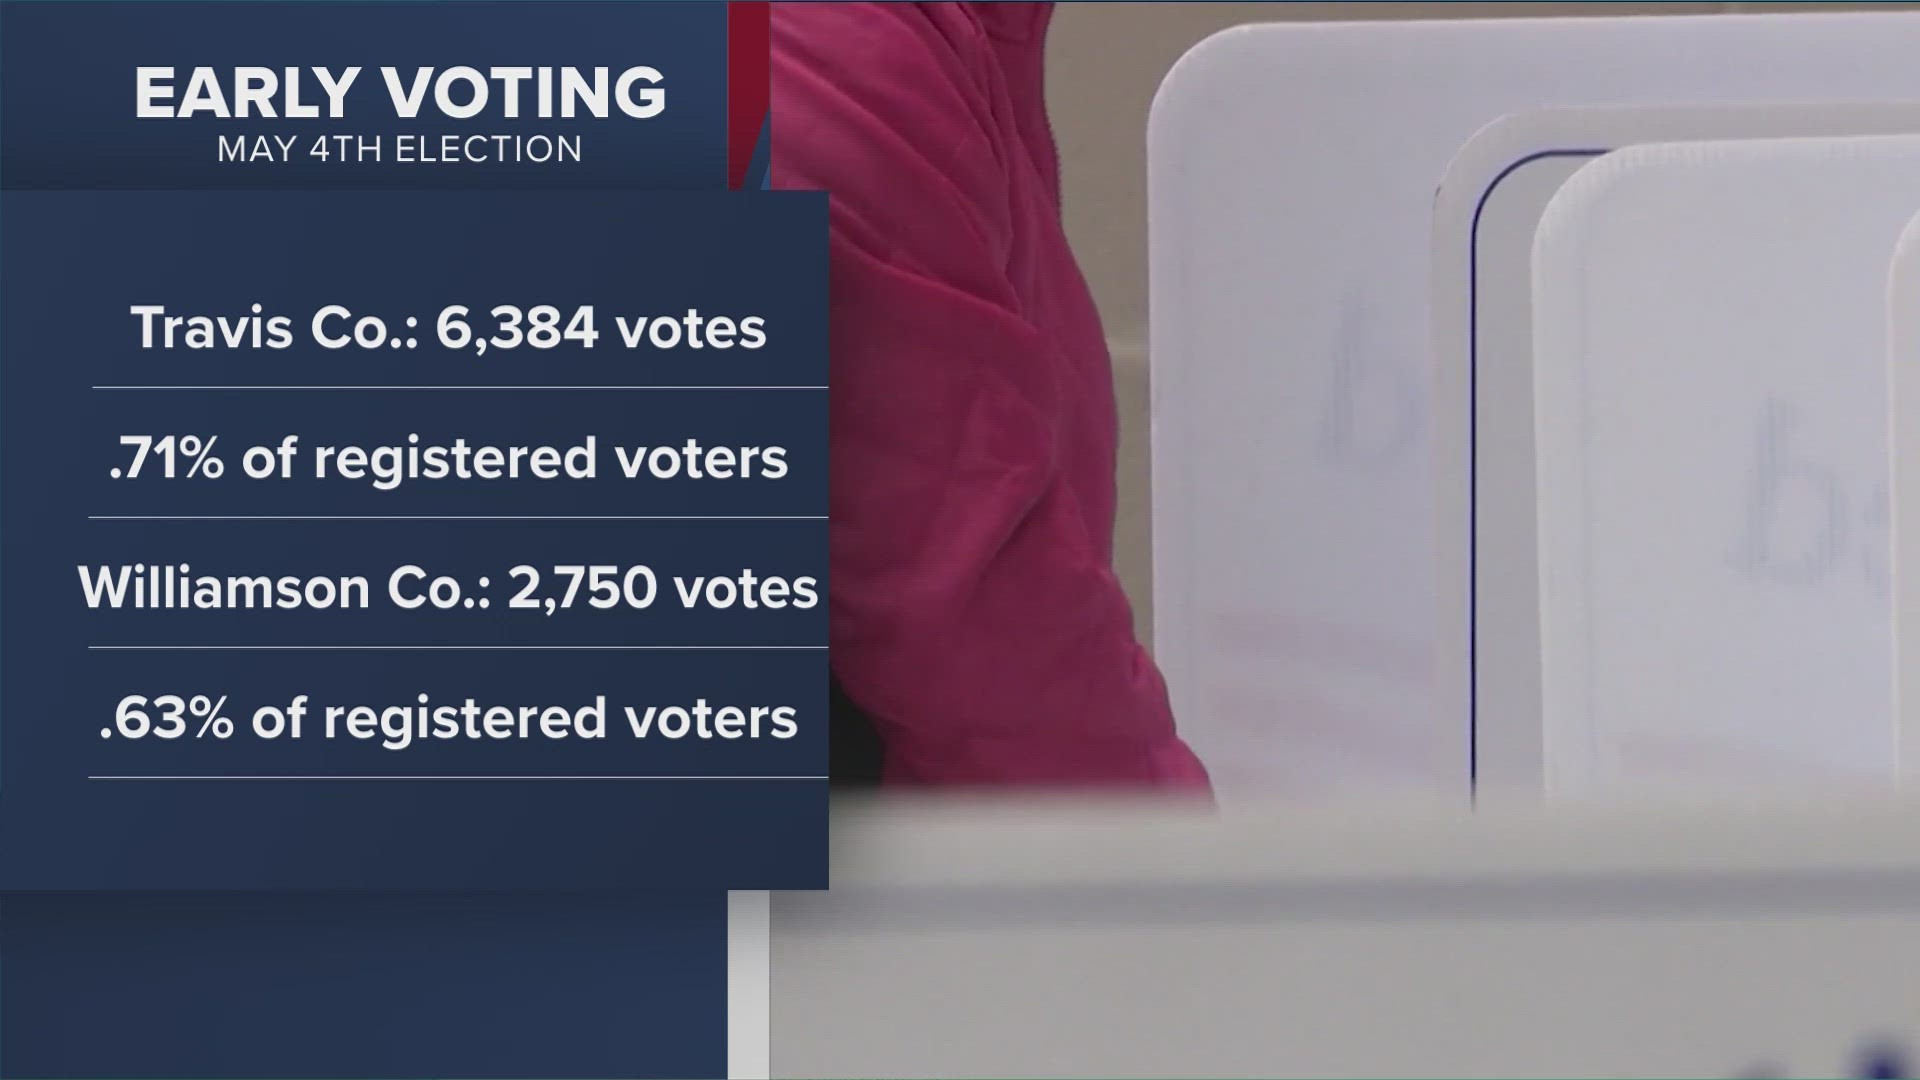 Here's what we've seen so far with turnout.